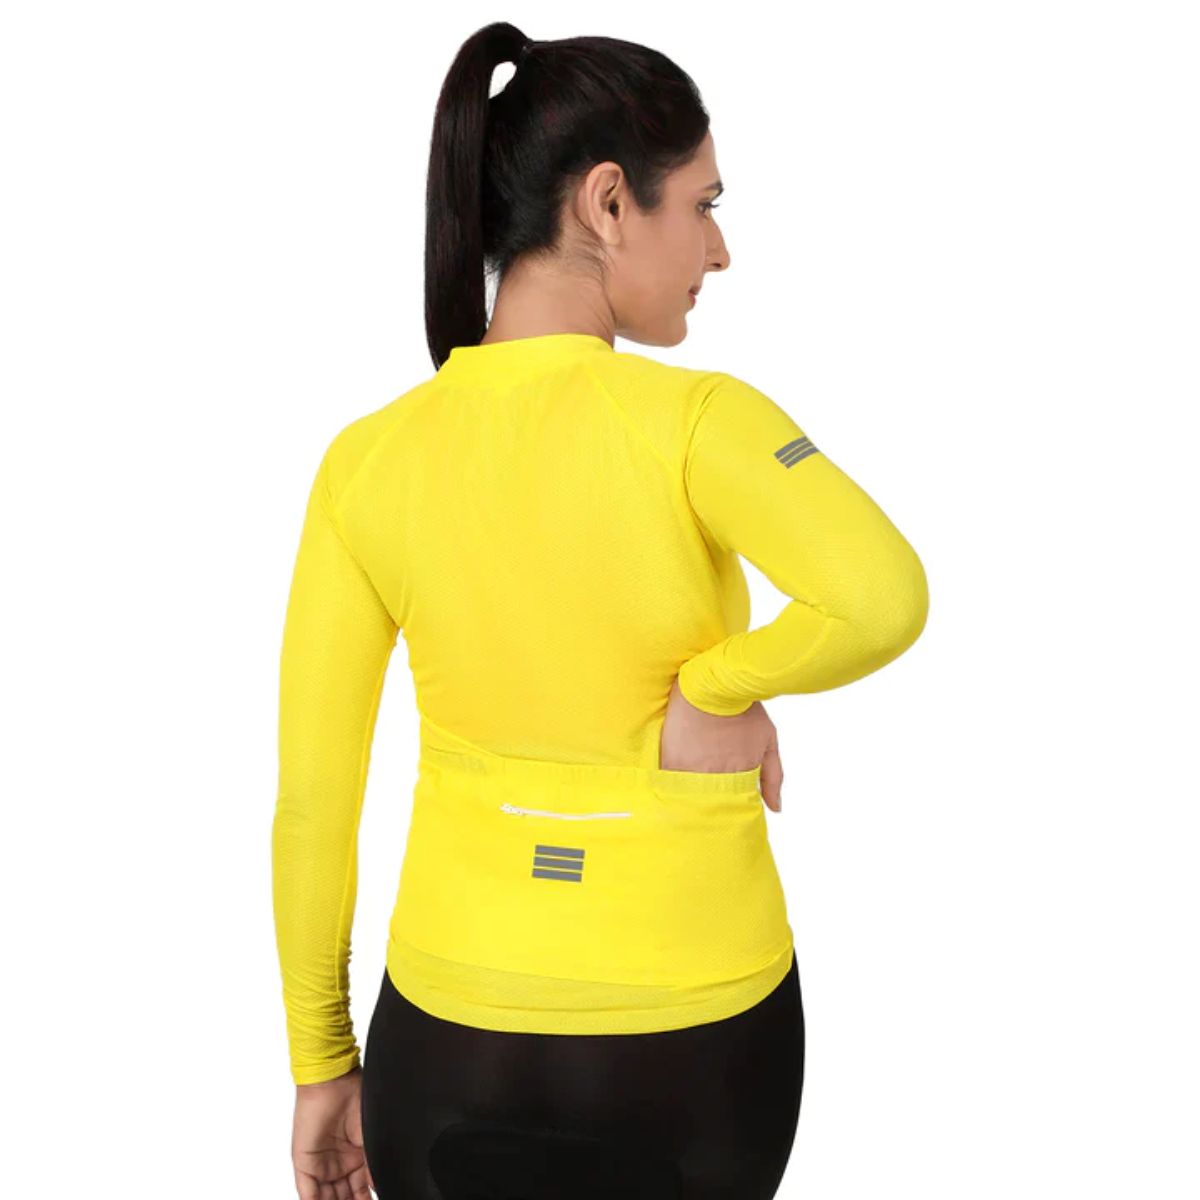 Womens BeVisible Cycling Jersey - Full Sleeves - Bright Yellow 3